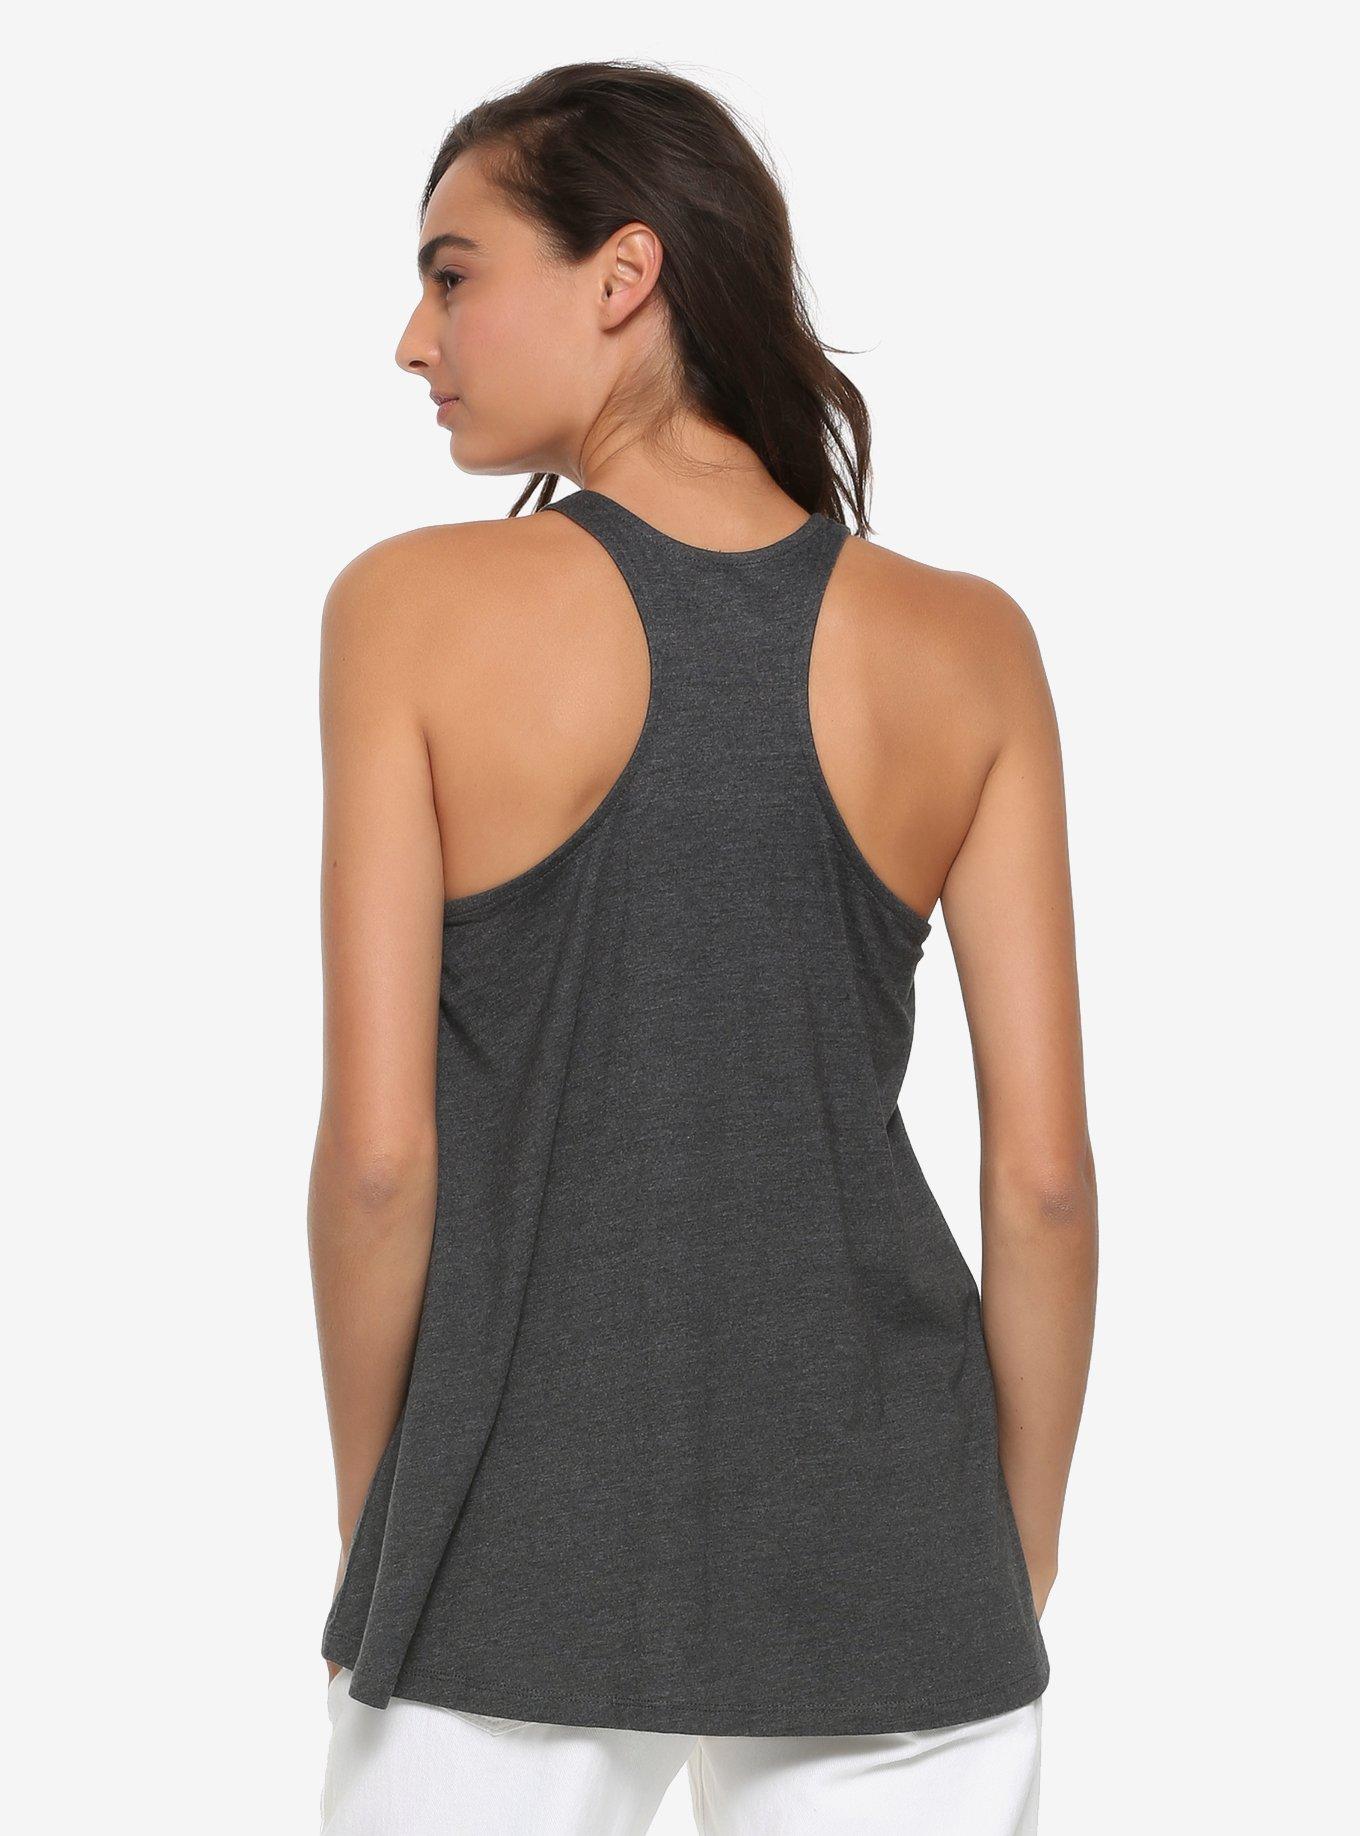 Irish Now Hangover Later Womens Tank Top - BoxLunch Exclusive, GREY, alternate